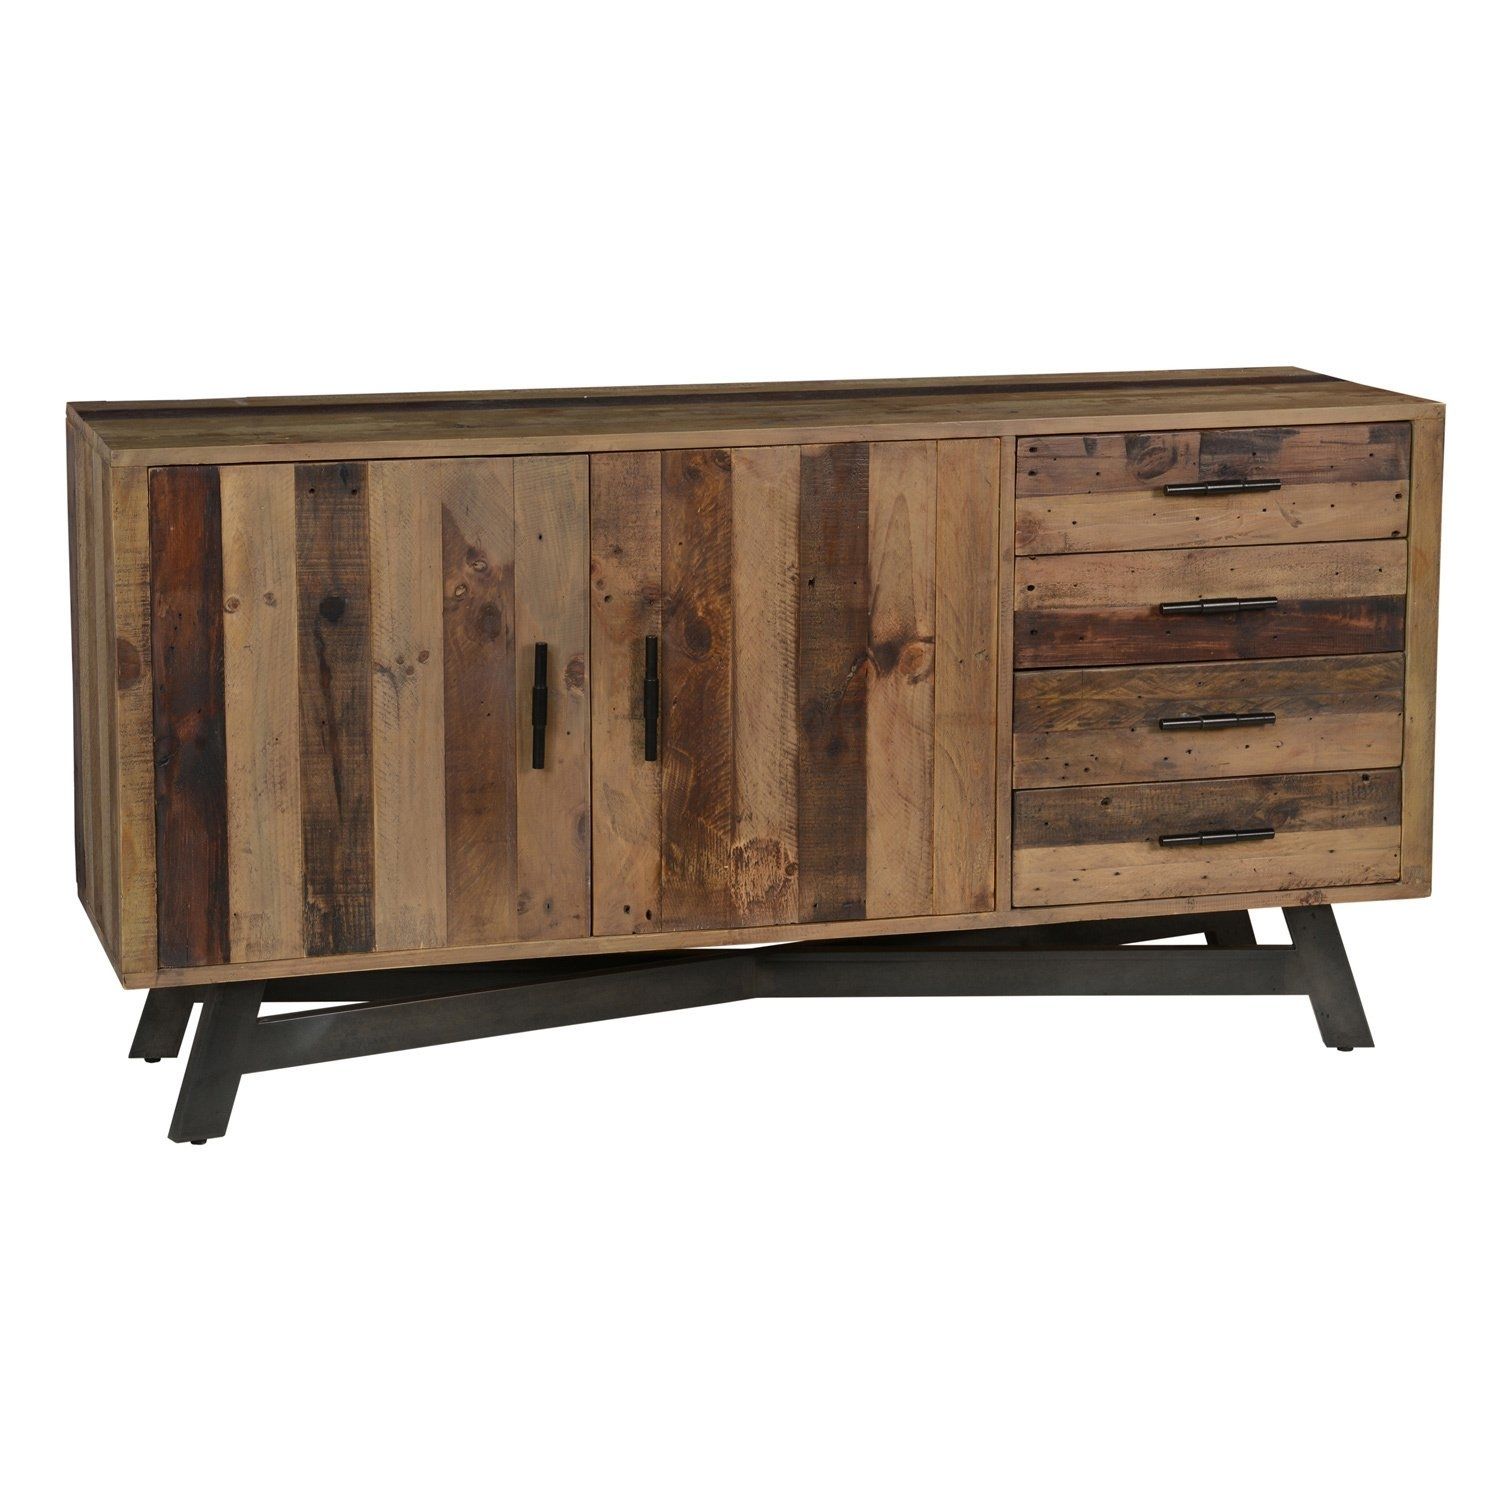 Shop Holden Reclaimed Wood 65 Inch Sideboardkosas Home – Free Pertaining To Reclaimed Sideboards With Metal Panel (Photo 8 of 30)